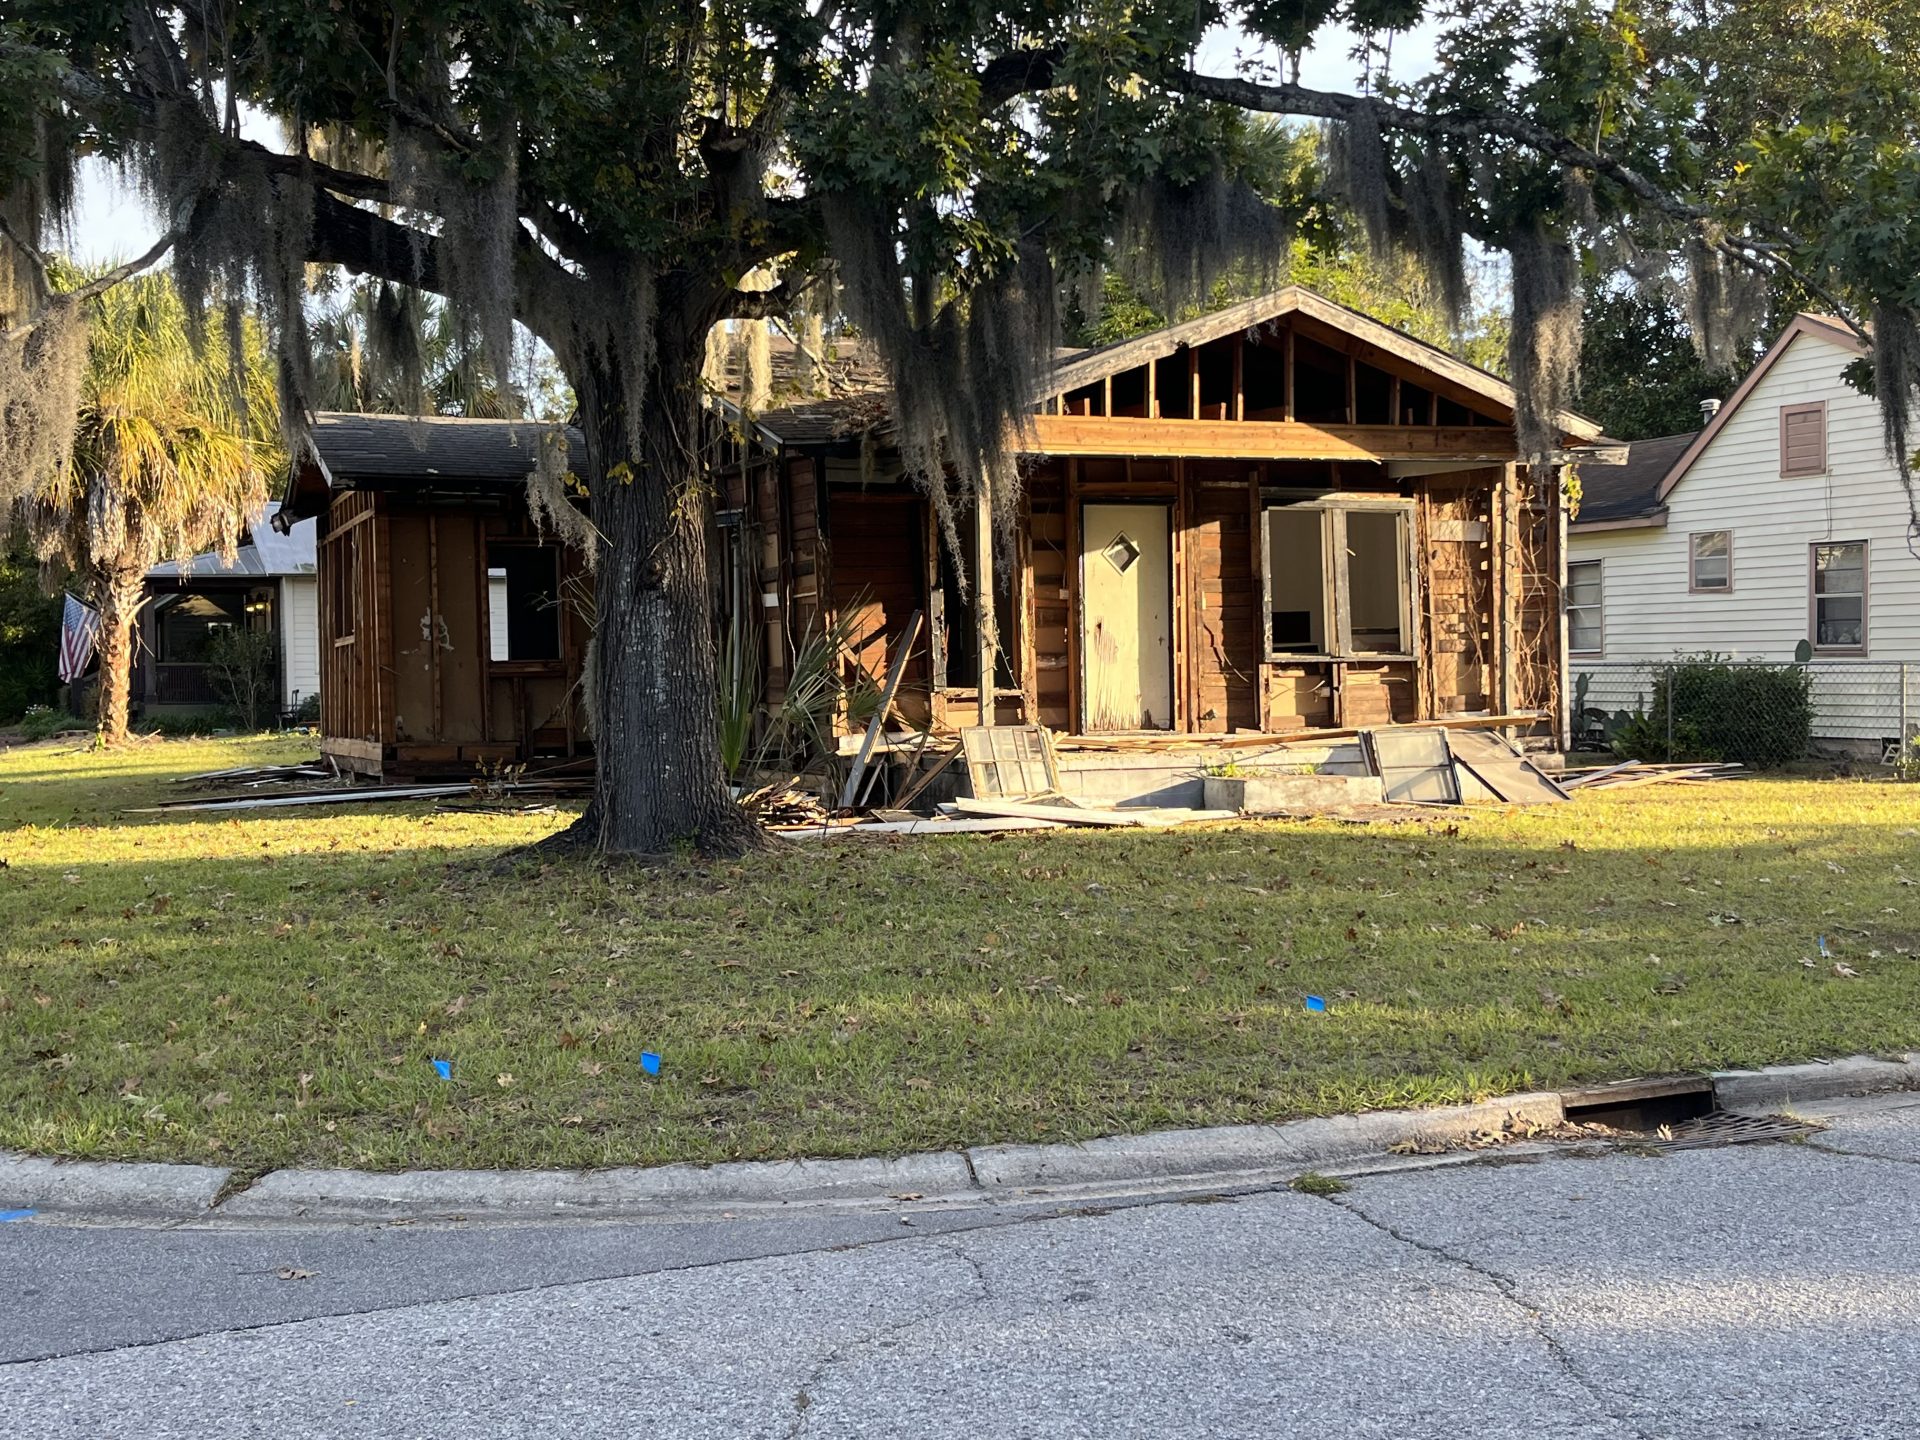 A house at 811 Congress Street in the Northwest Quadrant was in the process of being taken apart Monday morning, Oct. 23 until City building inspectors put a stop/work order on the residential property for not having a demolition permit. Lolita Huckaby, The Island News